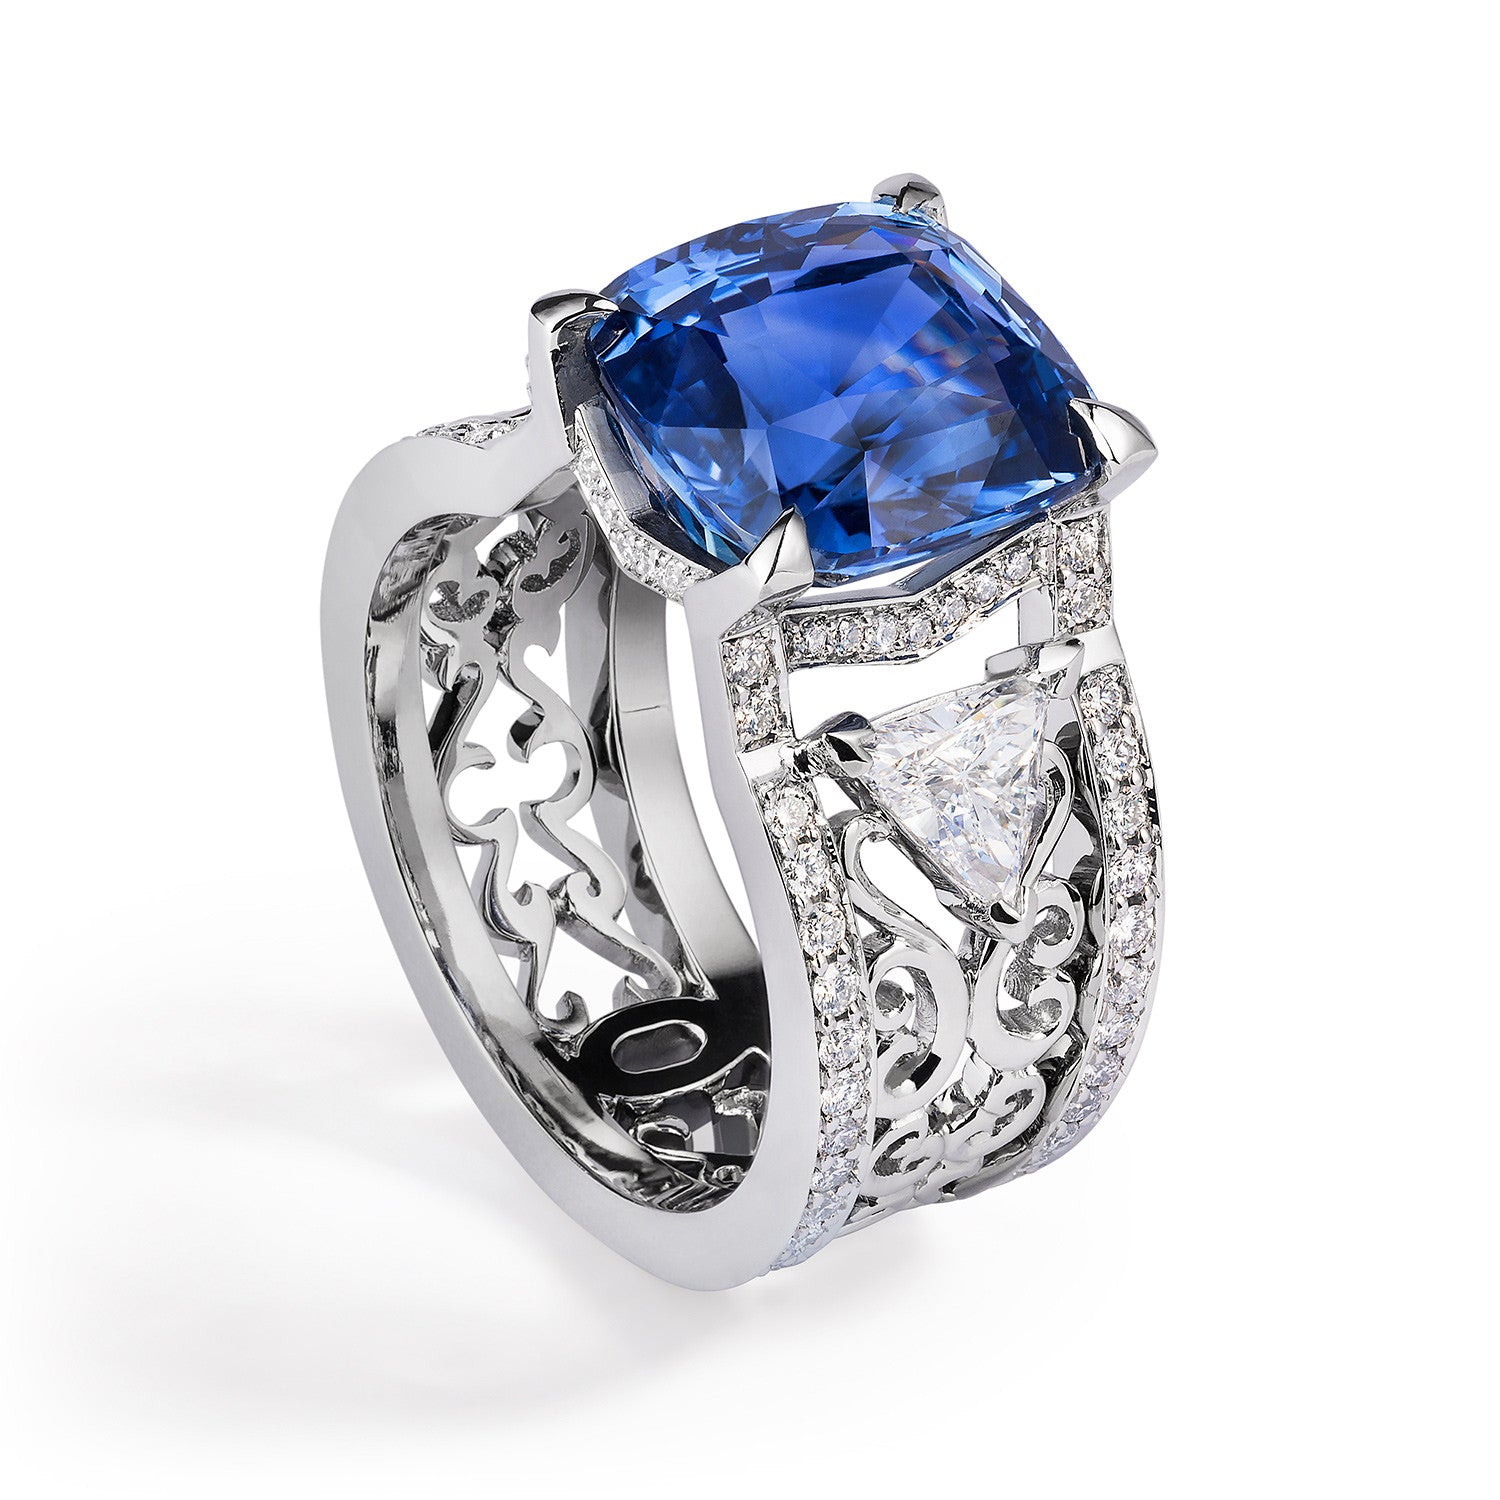 Bespoke Damir engagement ring - 100% recycled platinum, 7ct sapphire, conflict-free diamonds and filigree 